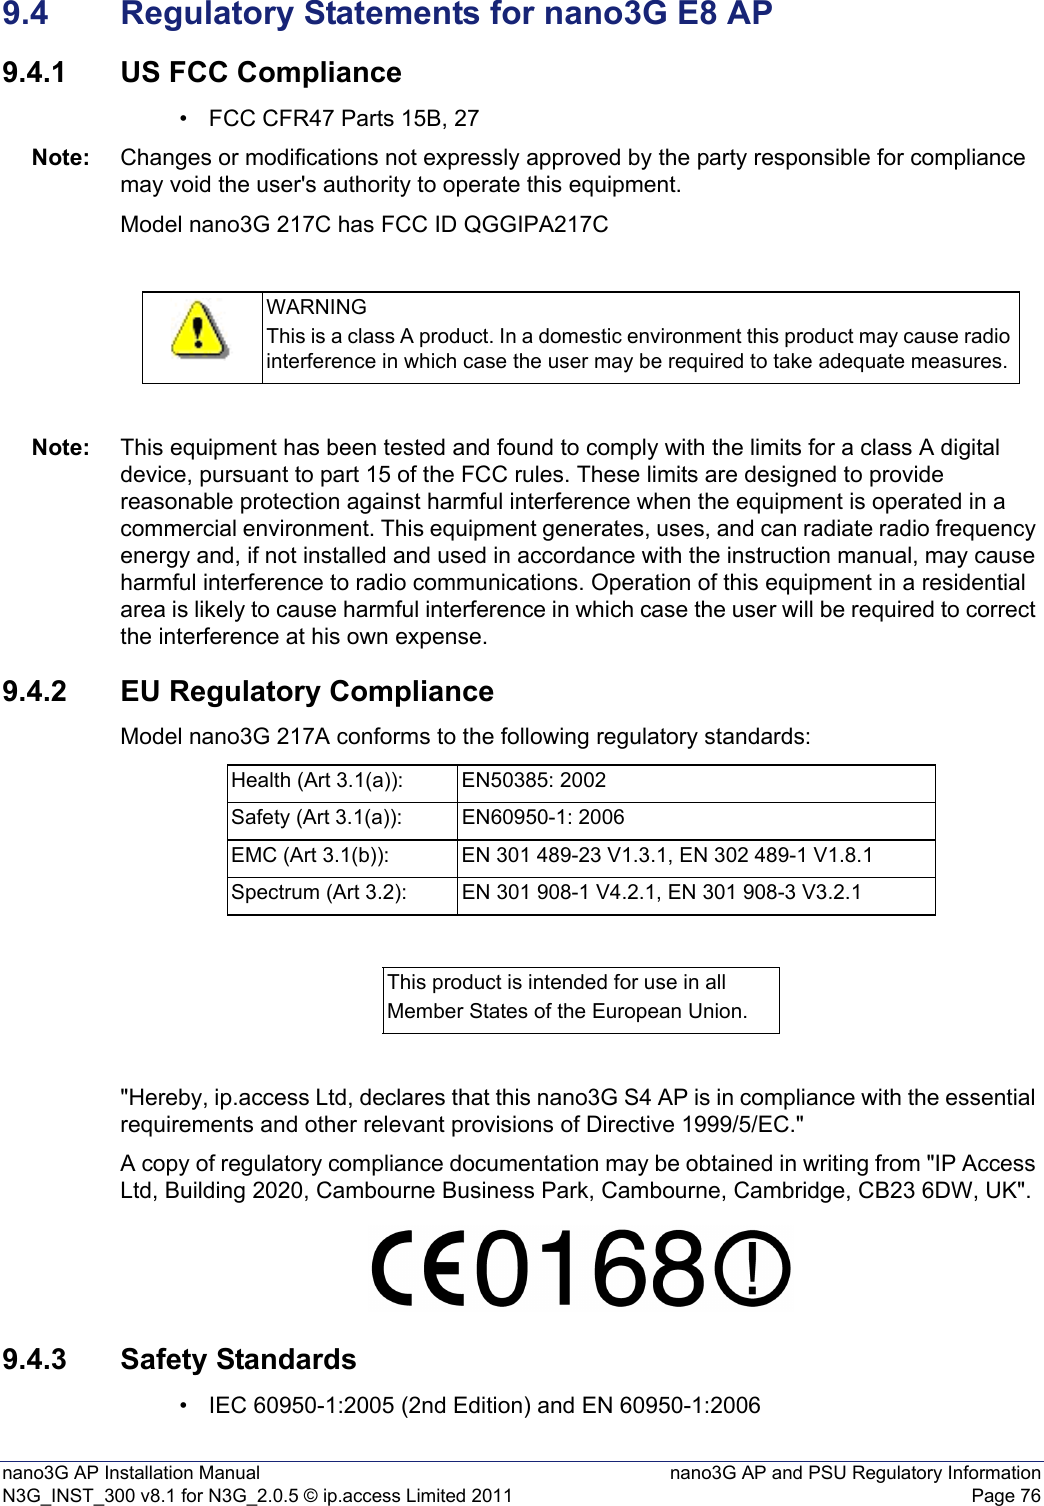 nano3G AP Installation Manual nano3G AP and PSU Regulatory InformationN3G_INST_300 v8.1 for N3G_2.0.5 © ip.access Limited 2011 Page 769.4 Regulatory Statements for nano3G E8 AP9.4.1 US FCC Compliance• FCC CFR47 Parts 15B, 27Note: Changes or modifications not expressly approved by the party responsible for compliance may void the user&apos;s authority to operate this equipment.Model nano3G 217C has FCC ID QGGIPA217CNote: This equipment has been tested and found to comply with the limits for a class A digital device, pursuant to part 15 of the FCC rules. These limits are designed to provide reasonable protection against harmful interference when the equipment is operated in a commercial environment. This equipment generates, uses, and can radiate radio frequency energy and, if not installed and used in accordance with the instruction manual, may cause harmful interference to radio communications. Operation of this equipment in a residential area is likely to cause harmful interference in which case the user will be required to correct the interference at his own expense.9.4.2 EU Regulatory ComplianceModel nano3G 217A conforms to the following regulatory standards:&quot;Hereby, ip.access Ltd, declares that this nano3G S4 AP is in compliance with the essential requirements and other relevant provisions of Directive 1999/5/EC.&quot;A copy of regulatory compliance documentation may be obtained in writing from &quot;IP Access Ltd, Building 2020, Cambourne Business Park, Cambourne, Cambridge, CB23 6DW, UK&quot;.9.4.3 Safety Standards• IEC 60950-1:2005 (2nd Edition) and EN 60950-1:2006WARNINGThis is a class A product. In a domestic environment this product may cause radio interference in which case the user may be required to take adequate measures.Health (Art 3.1(a)): EN50385: 2002Safety (Art 3.1(a)): EN60950-1: 2006EMC (Art 3.1(b)): EN 301 489-23 V1.3.1, EN 302 489-1 V1.8.1Spectrum (Art 3.2): EN 301 908-1 V4.2.1, EN 301 908-3 V3.2.1This product is intended for use in allMember States of the European Union.